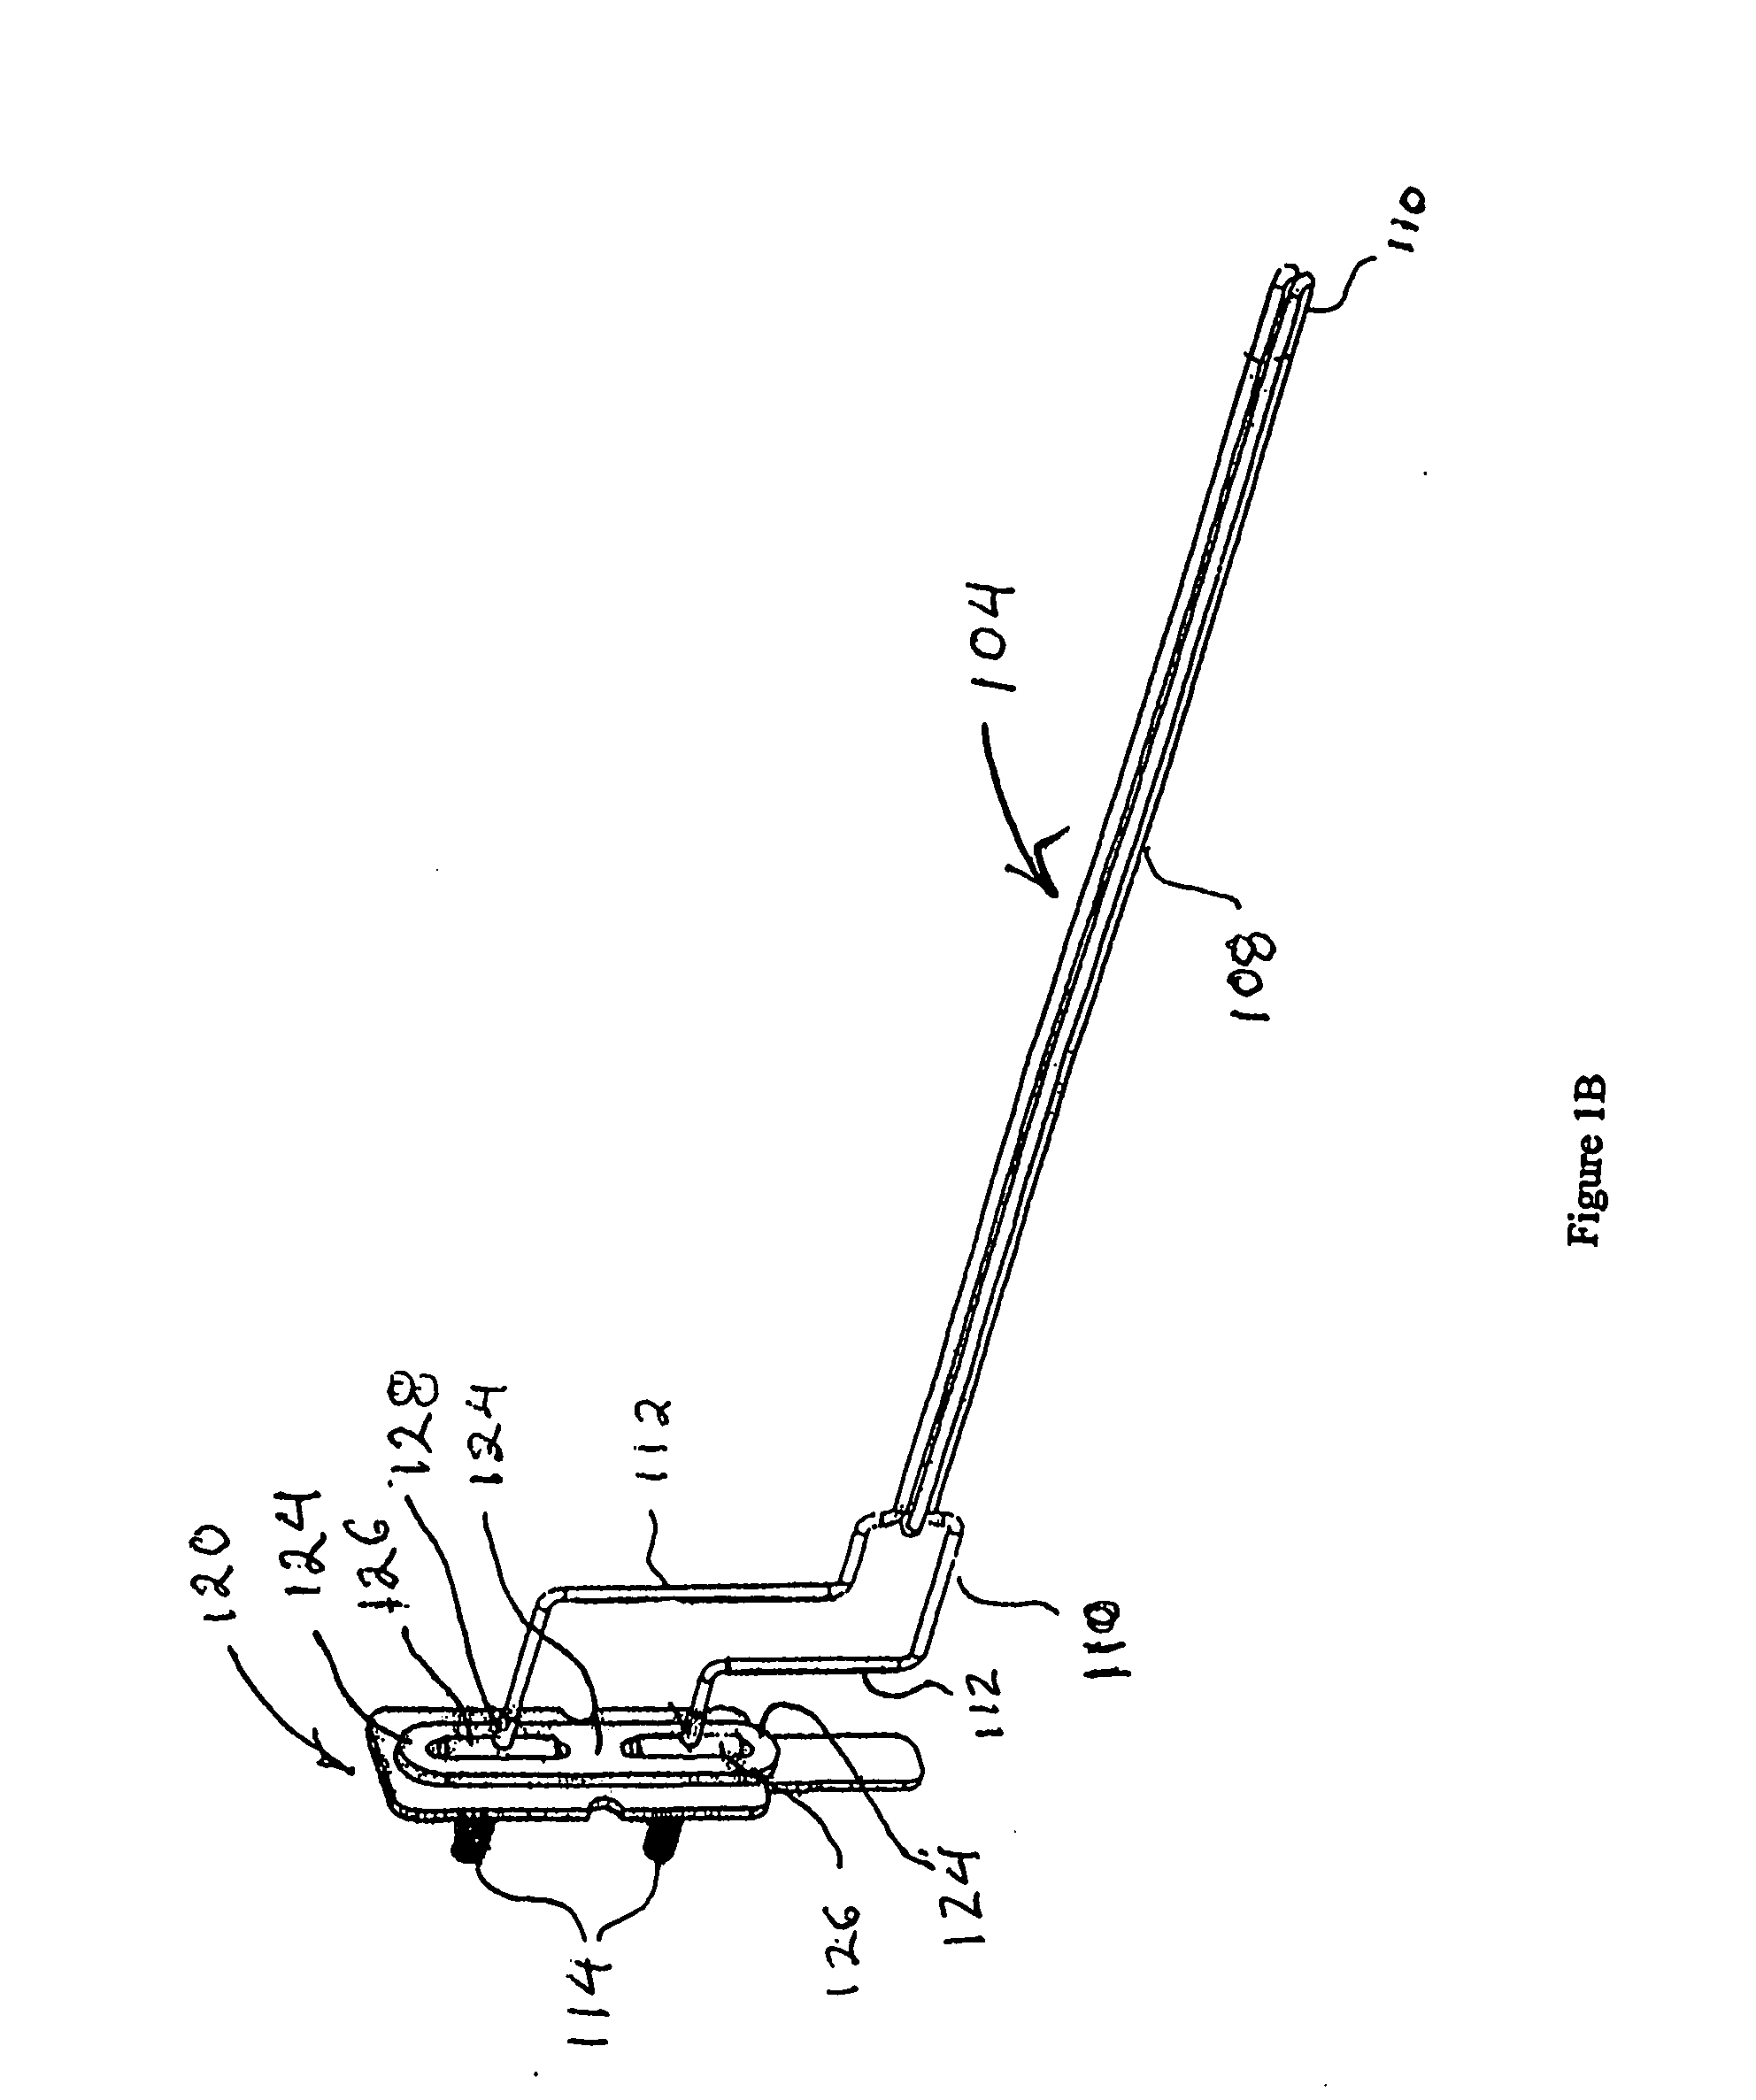 High temperature heating element for preventing contamination of a work piece